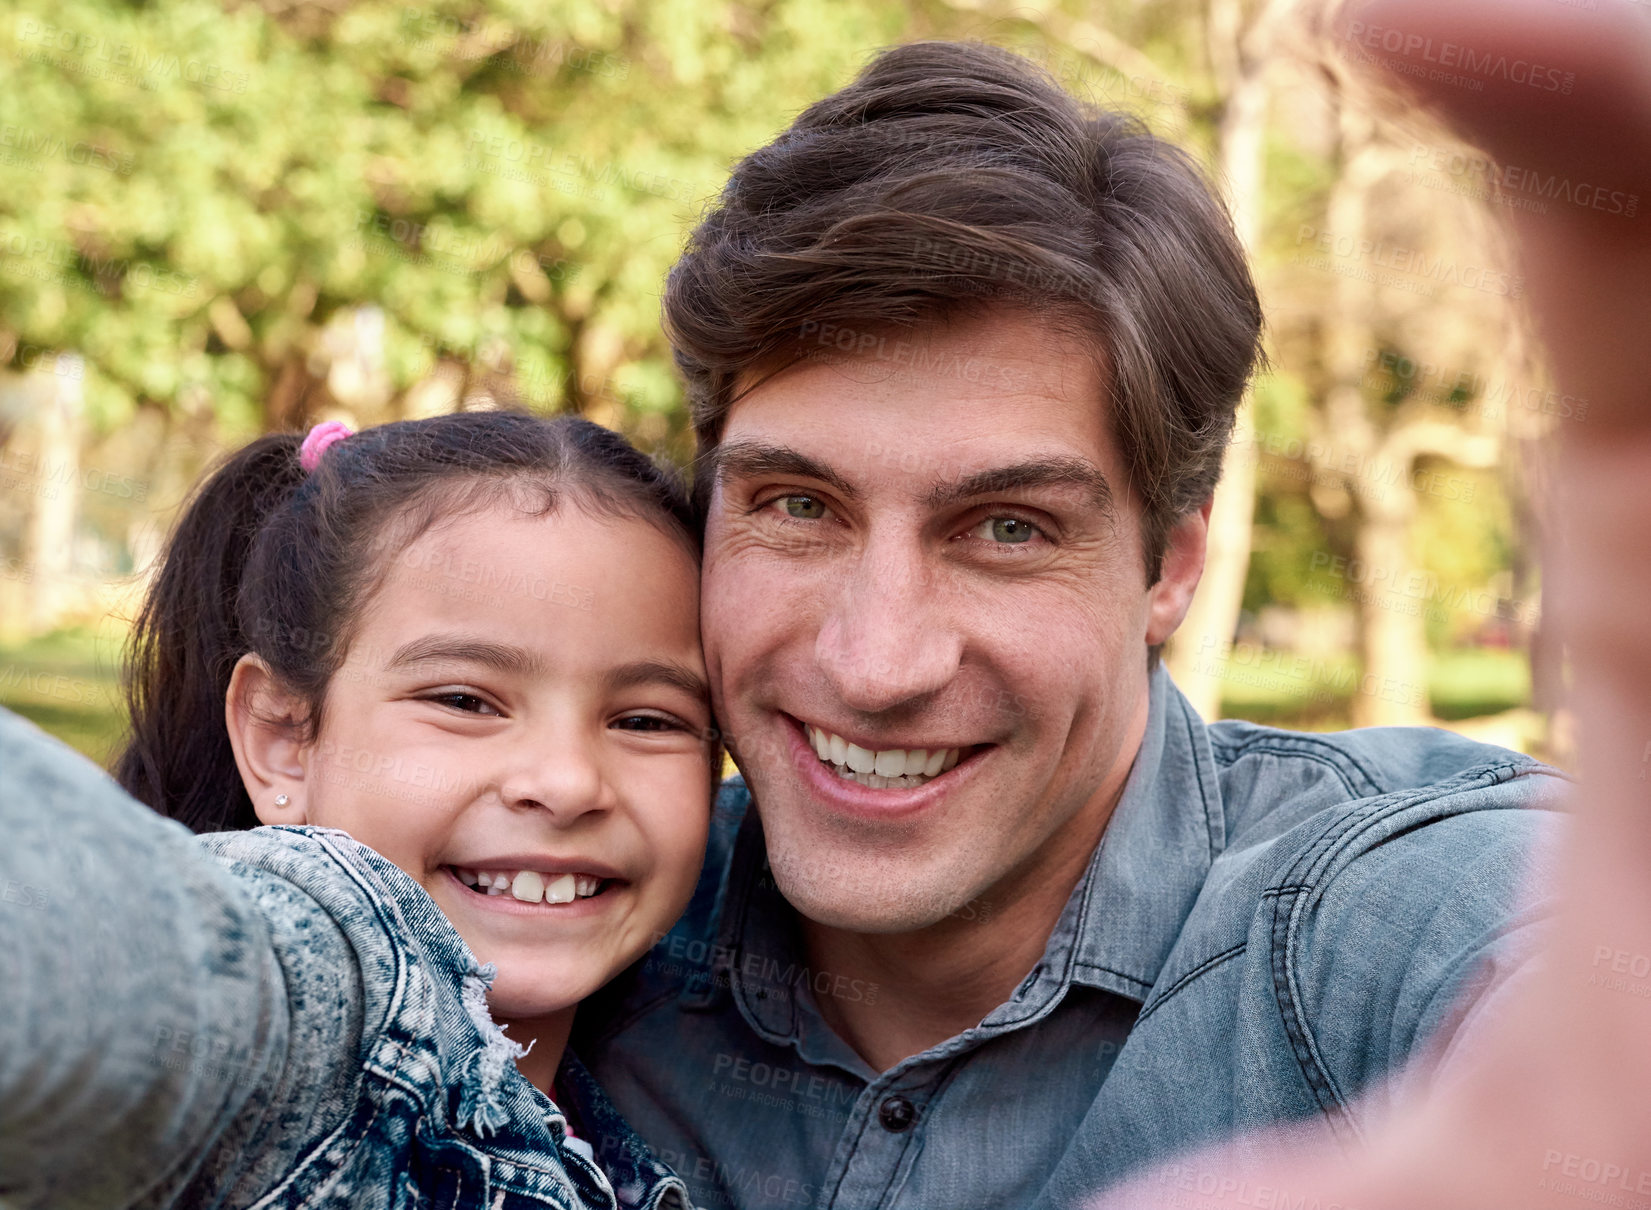 Buy stock photo Shot of a happy young man taking a selfie with his adorable daughter in the park